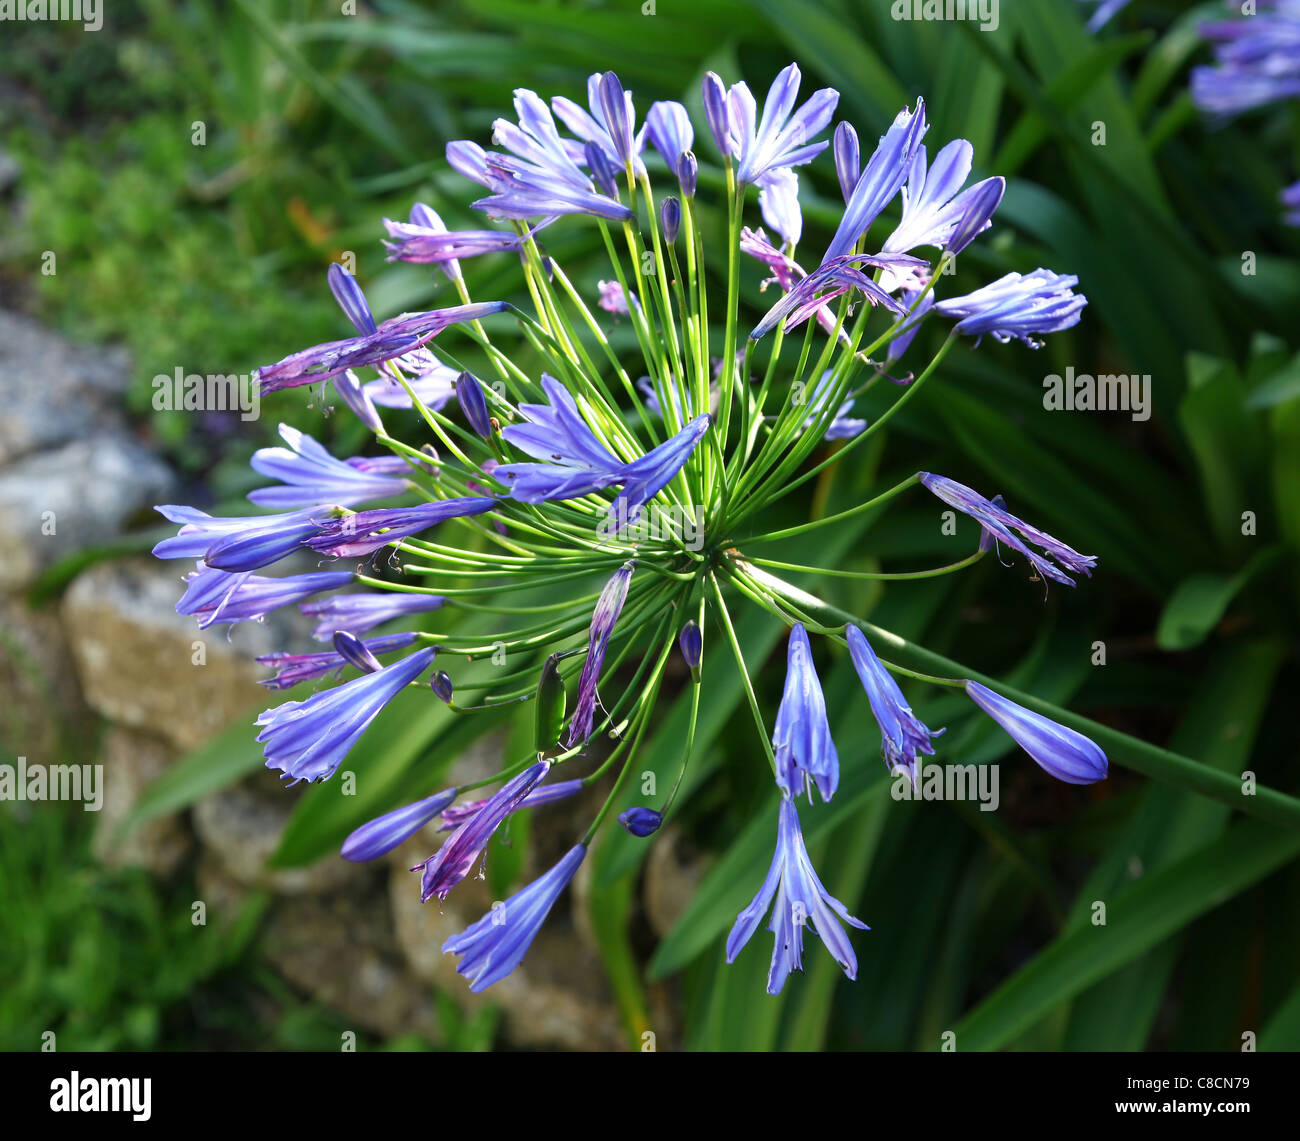 A blue flower head of a Common Agapanthus (Agapanthus praecox) Stock Photo